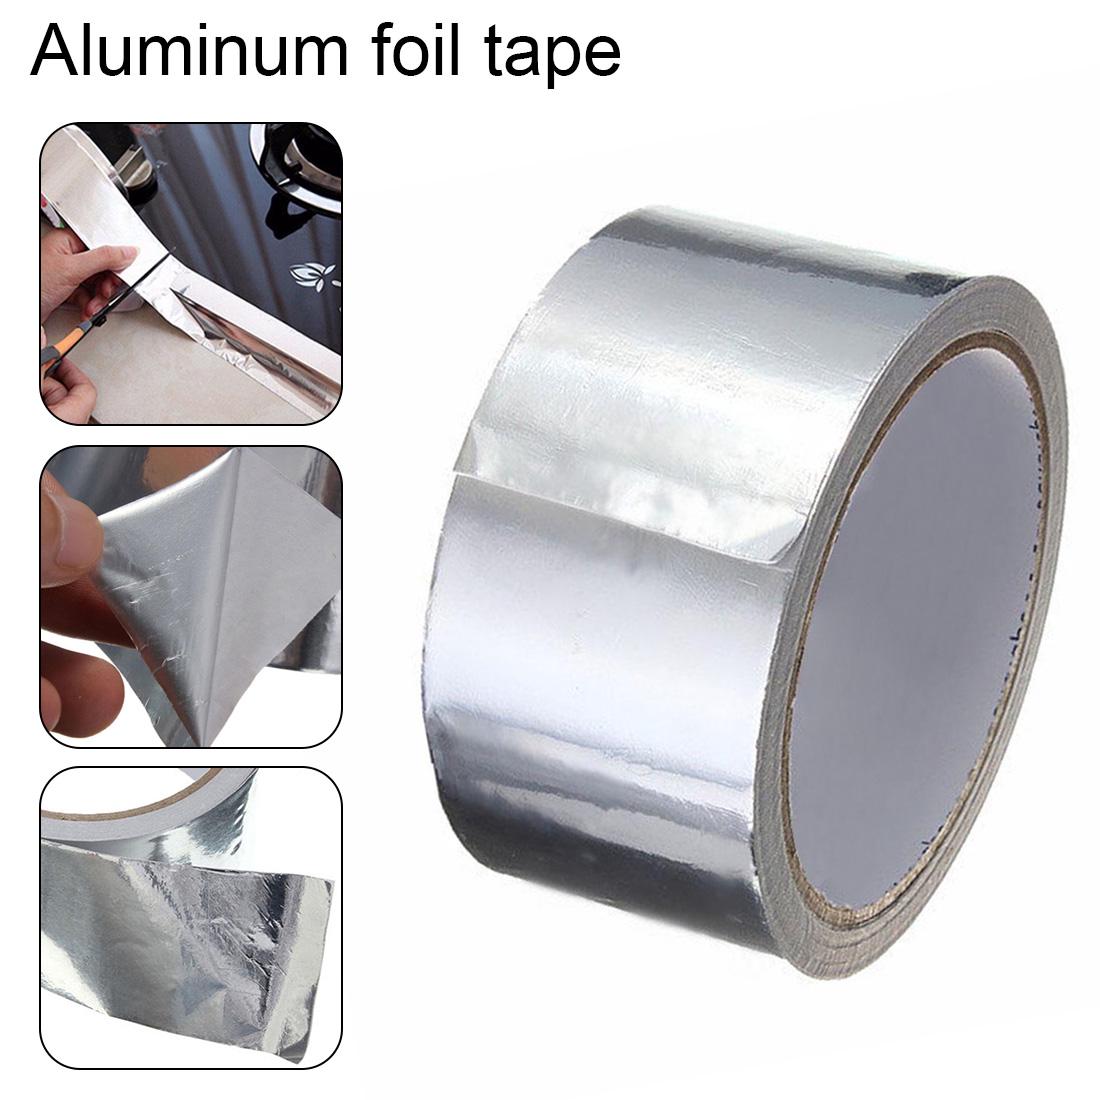 Aluminum Foil Tape 2 x 50 yd Air Vents and Insulation,Ourtapes Patching Hot & Cold Air Ducts Good for HVAC Professional Sealing 3.6Mil Silver Thick Aluminum Metal Tapes for Pipe Metal Repair 